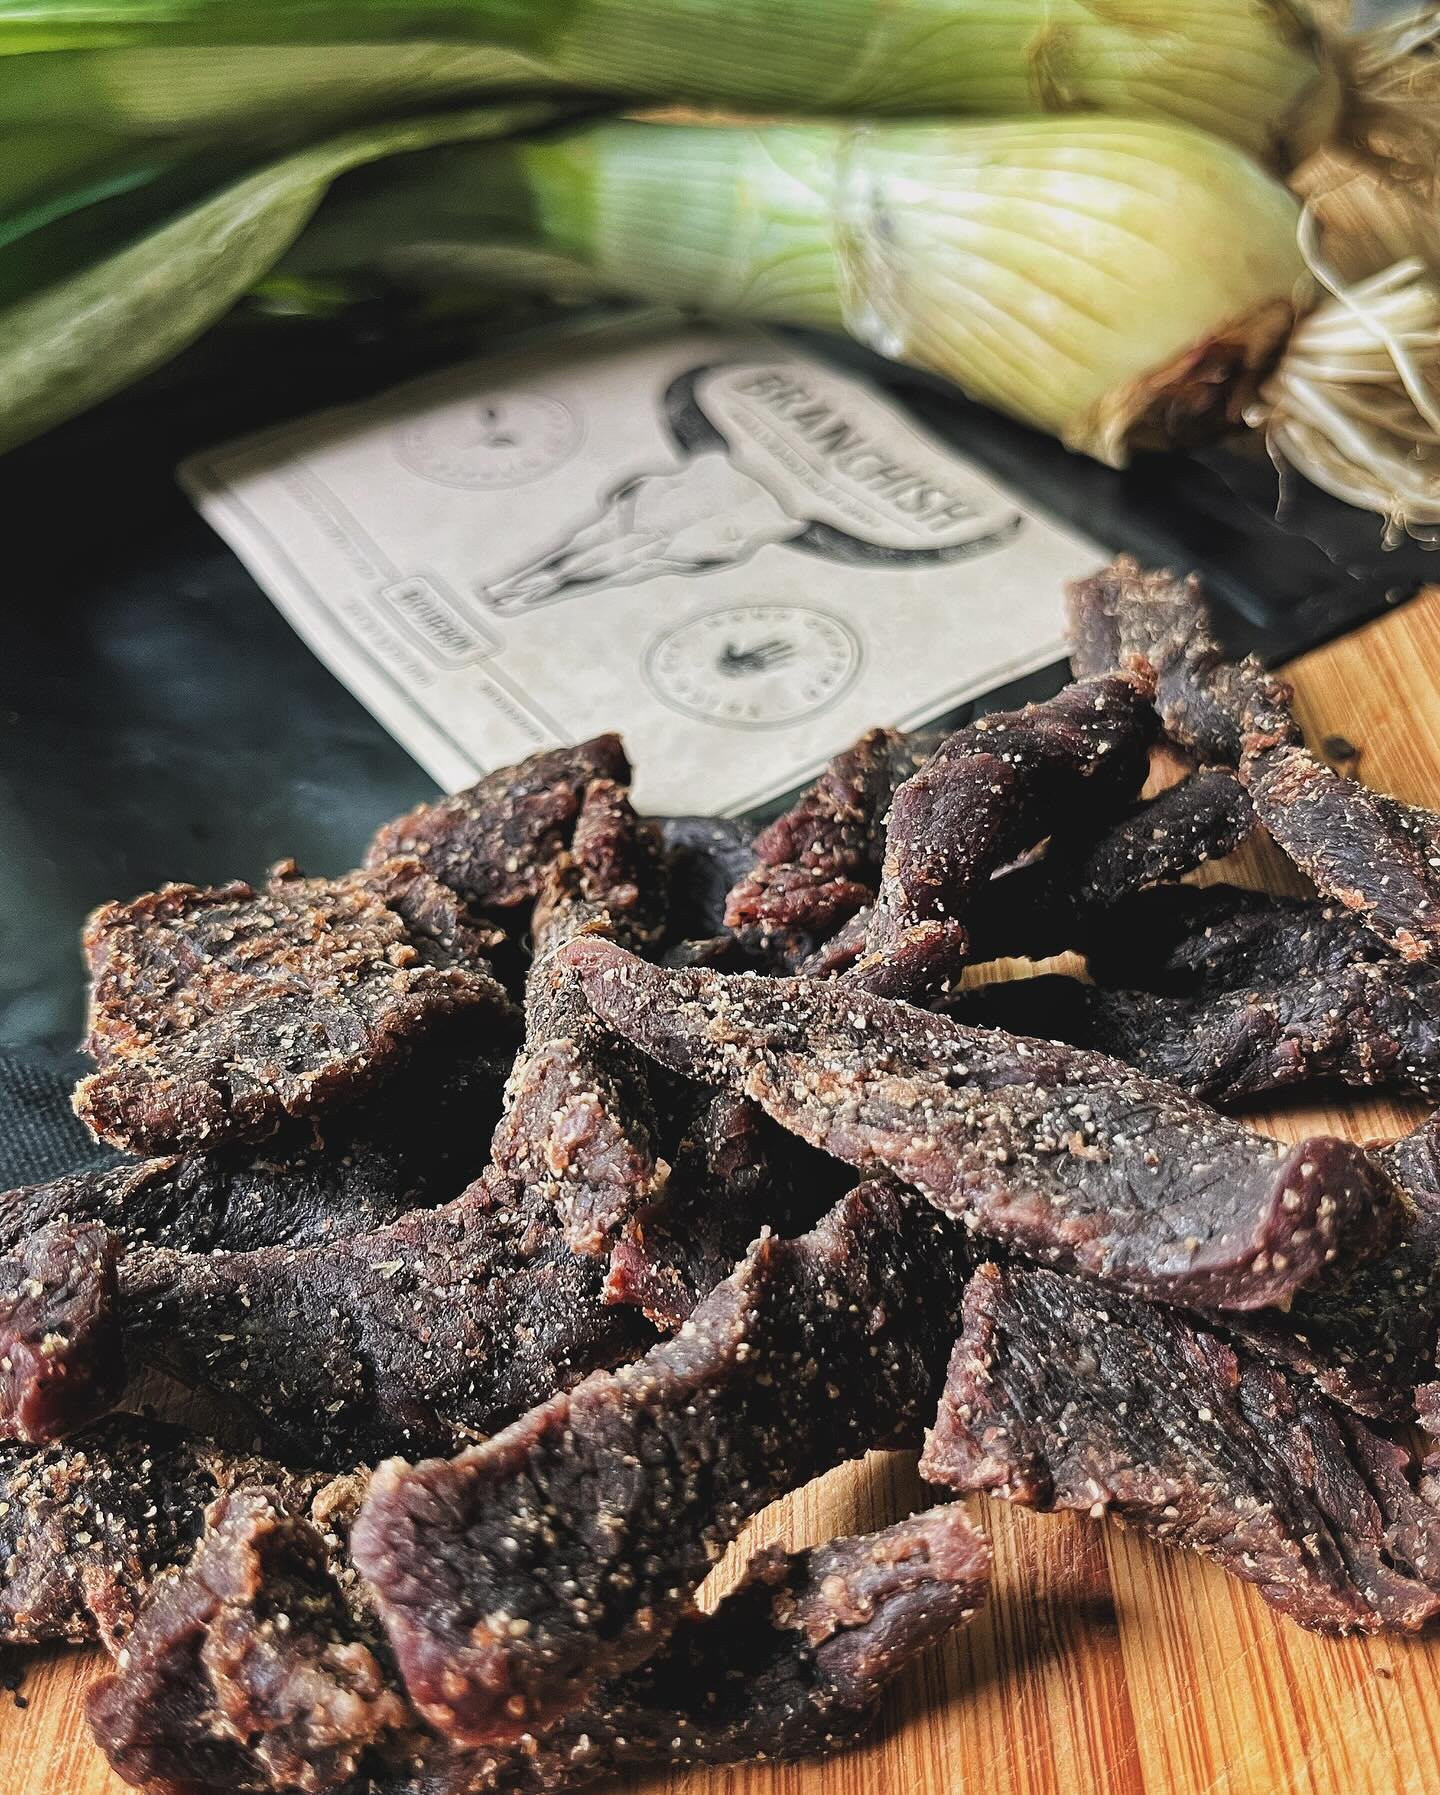 Are your mouths watering yet?!🤤

Hand crafted + Thick cut + Artisan + Locally Made + Delicious

1. #beefjerky #jerky #snacks #protein #healthysnacks #meat #delicious #yum #foodie  #foodporn #snacktime  #fitness#workoutfuel  #trailmix  #campingfood  